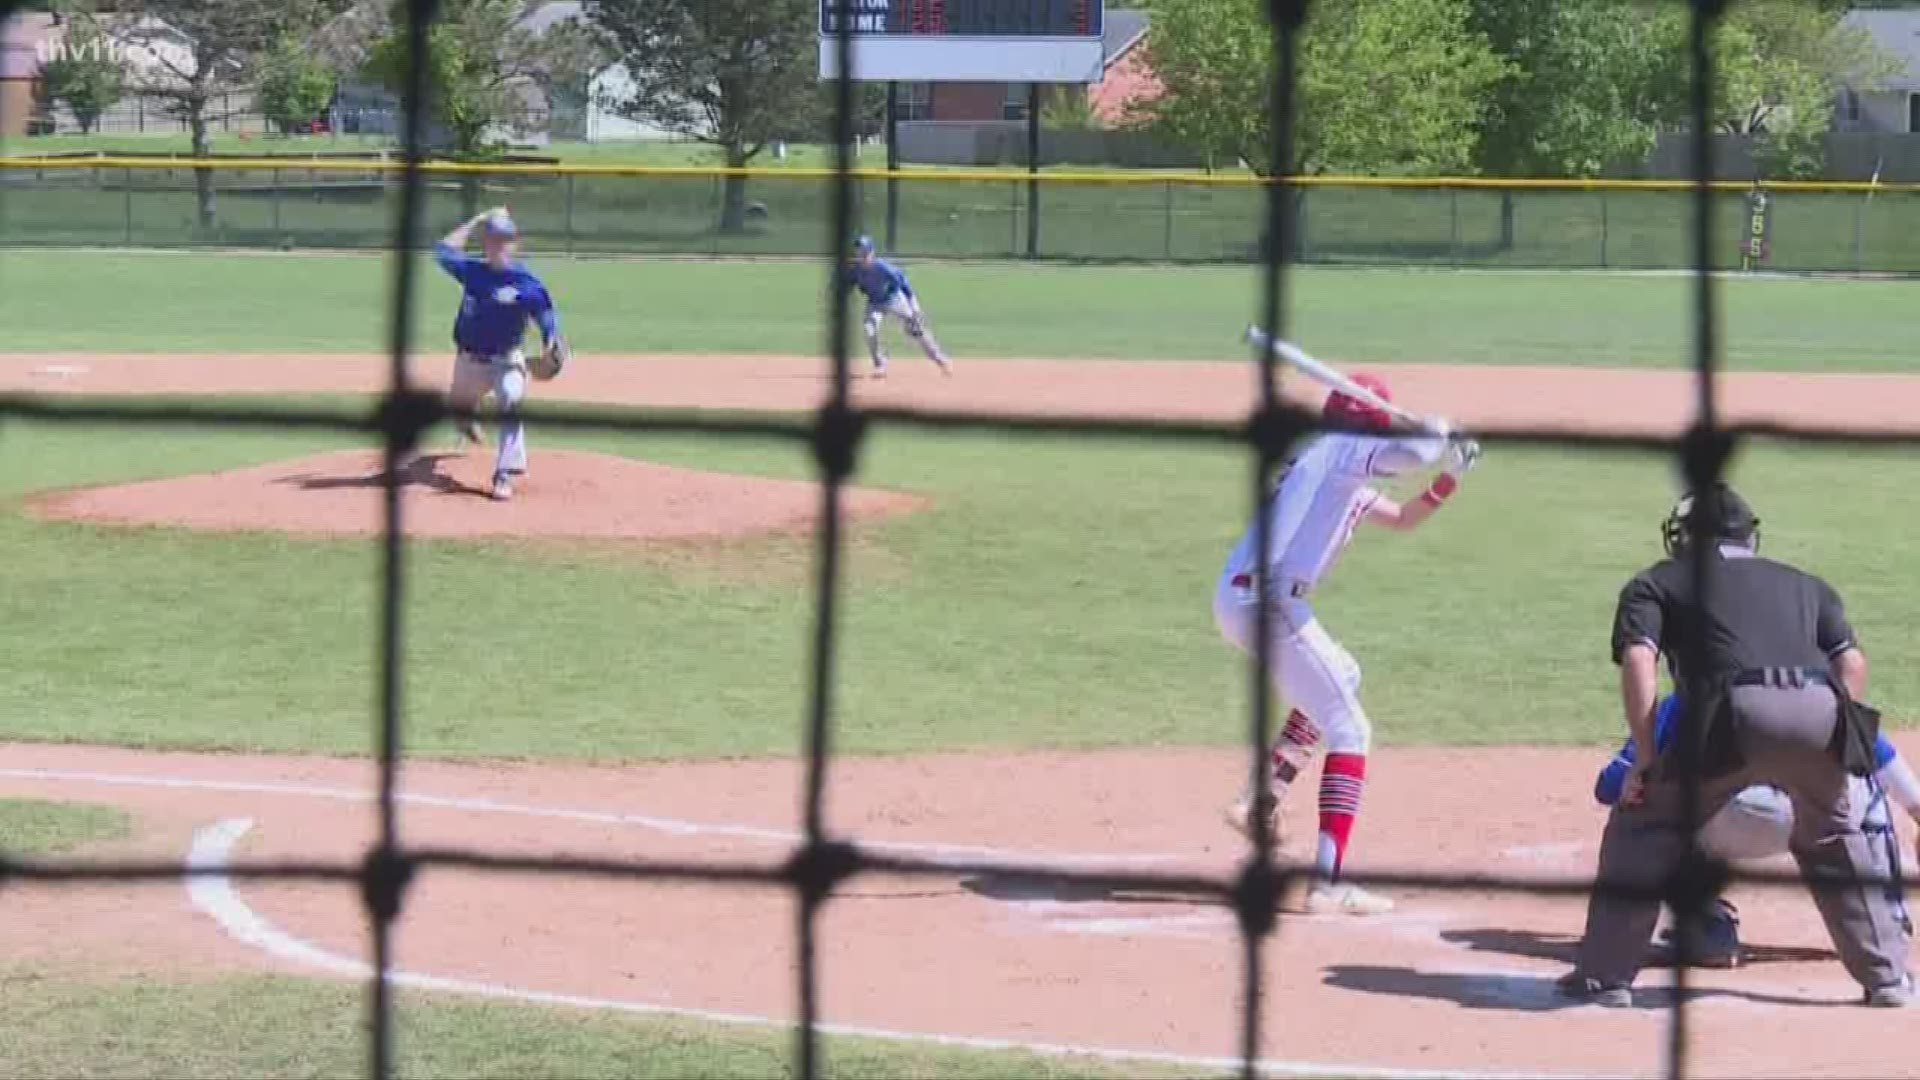 Cabot beats Rogers 6-3 to advance